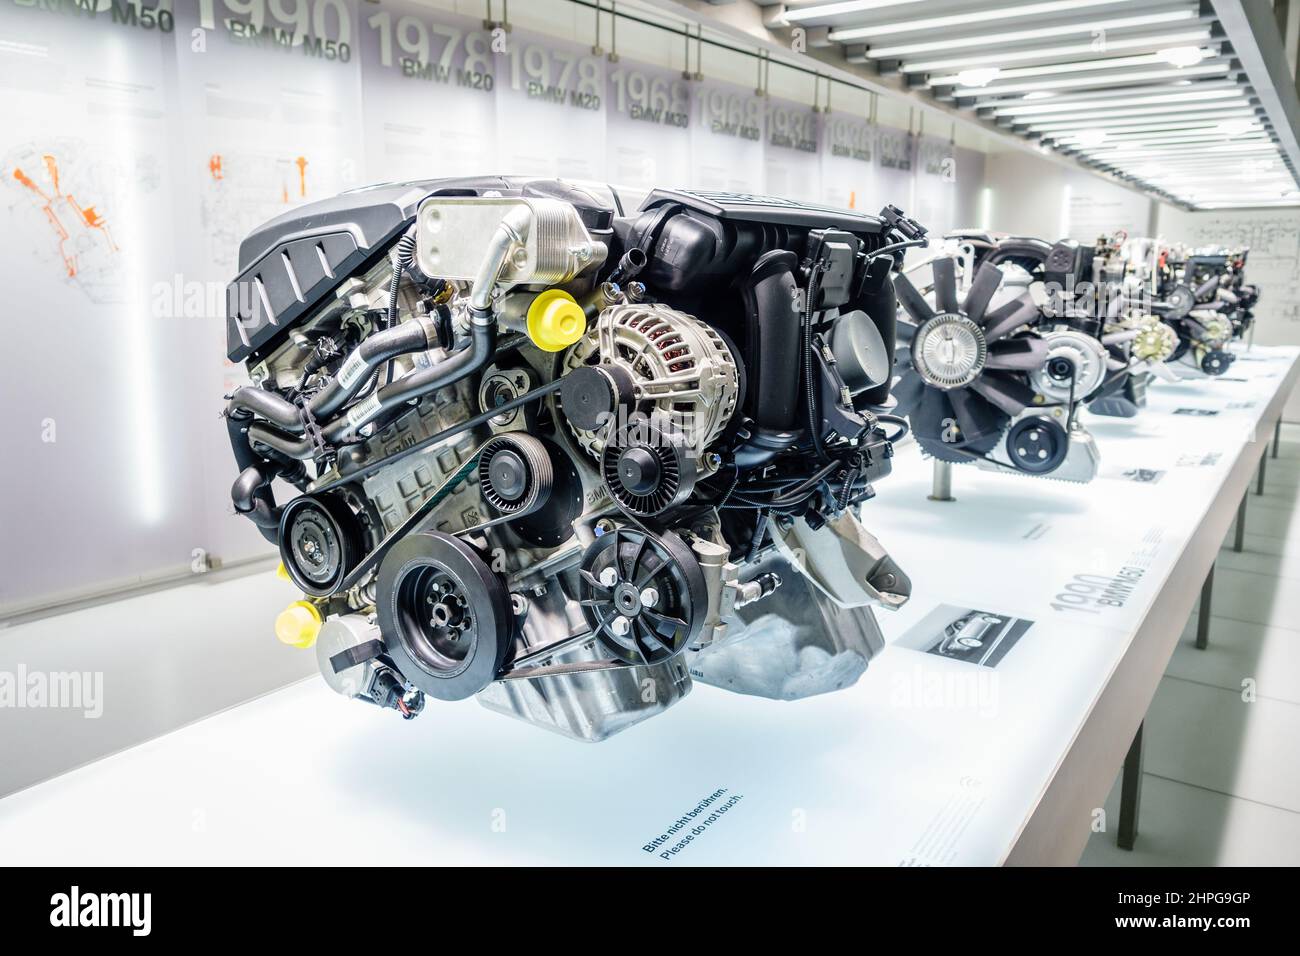 Munich, Germany, September 29, 2015: BMW engines on display at BMW Museum in Munich, Germany Stock Photo